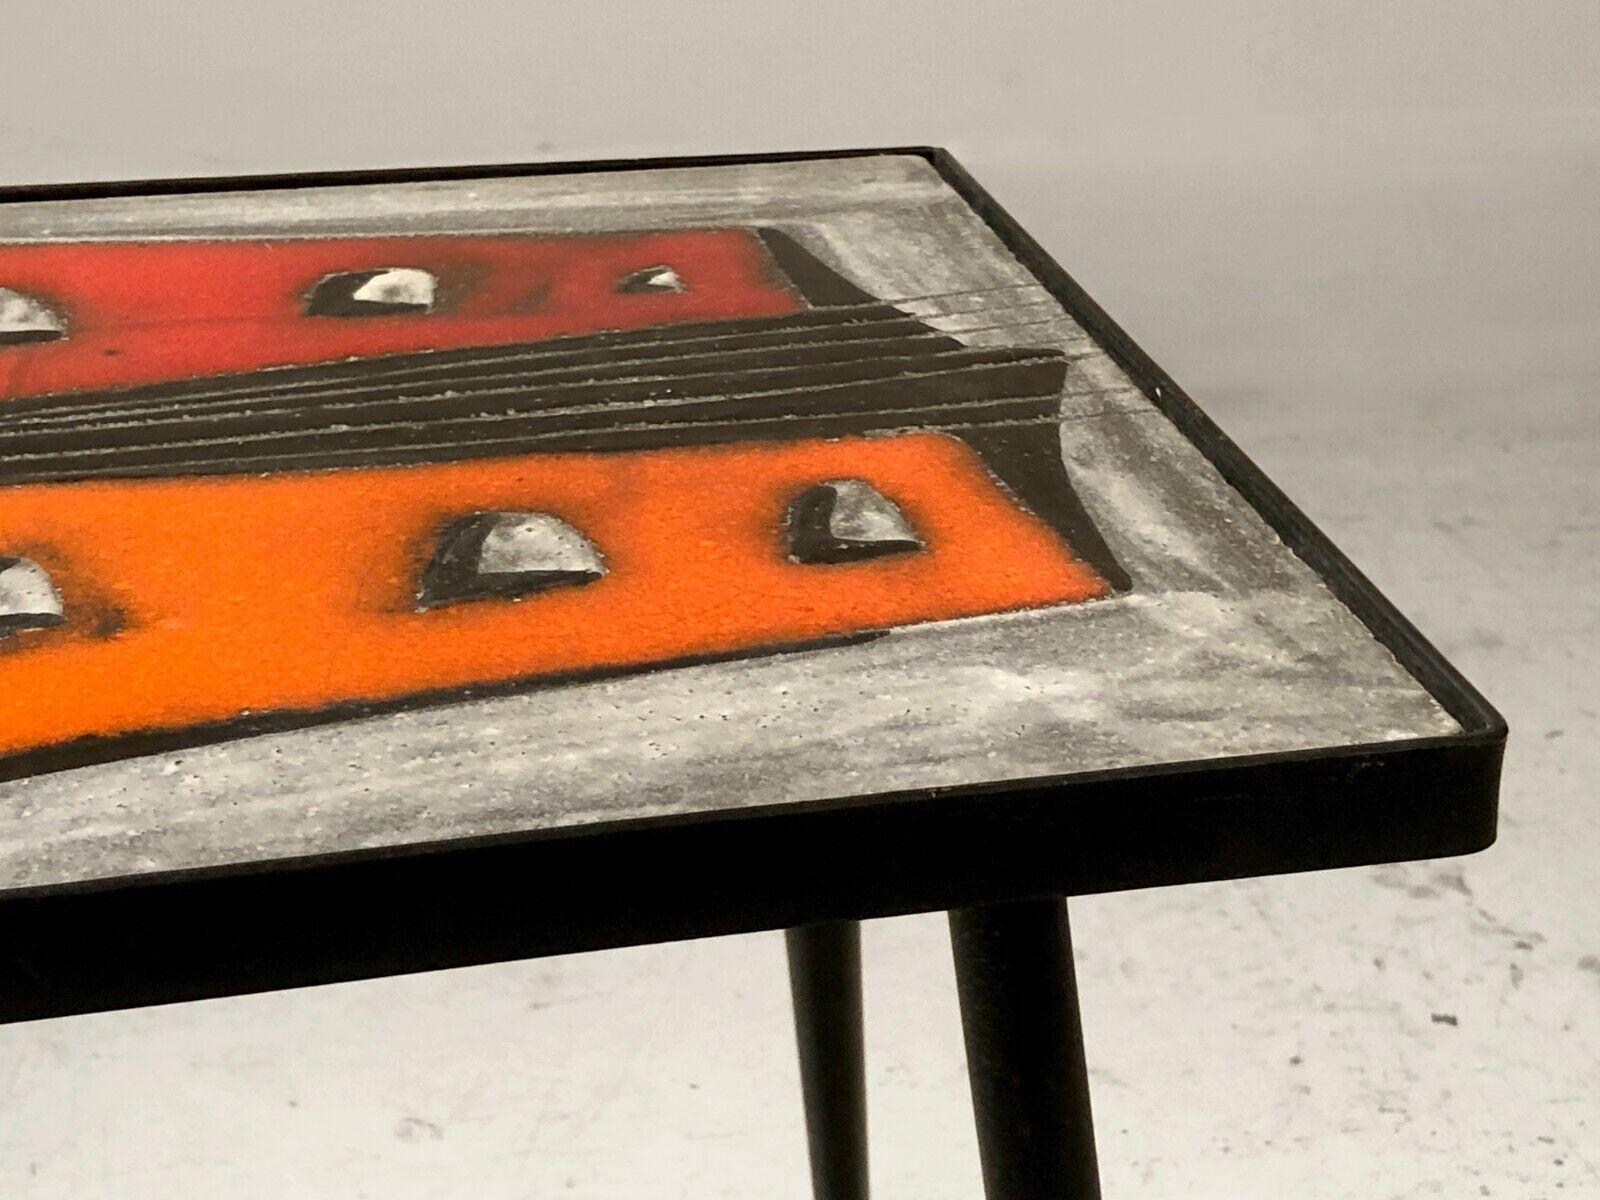 A MODERNIST SIDE or COFFEE Ceramic TABLE by JEAN & ROBERT CLOUTIER, France 1950 For Sale 2